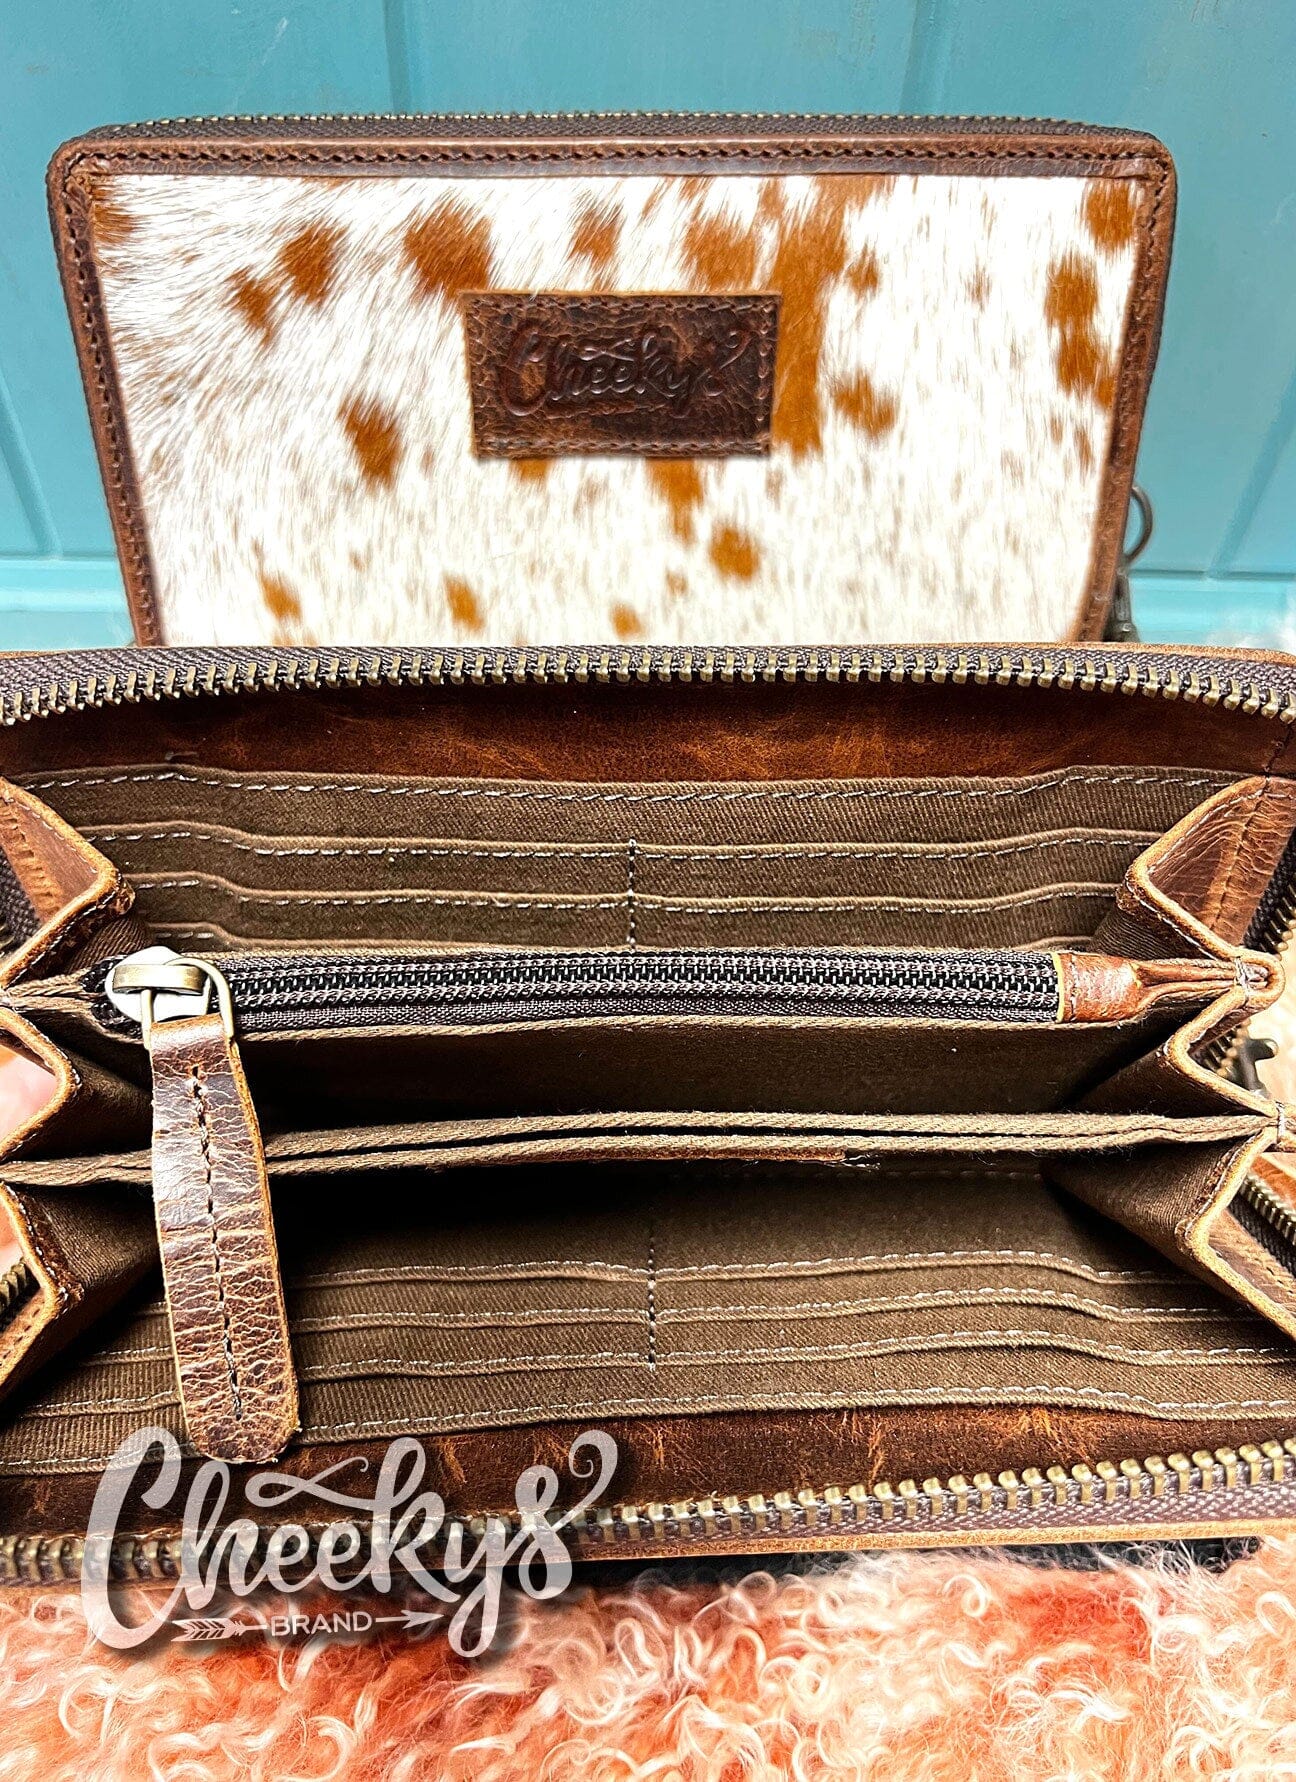 Betsy the Brown HOH Wallet/Clutch Leather Cheekys Brand 